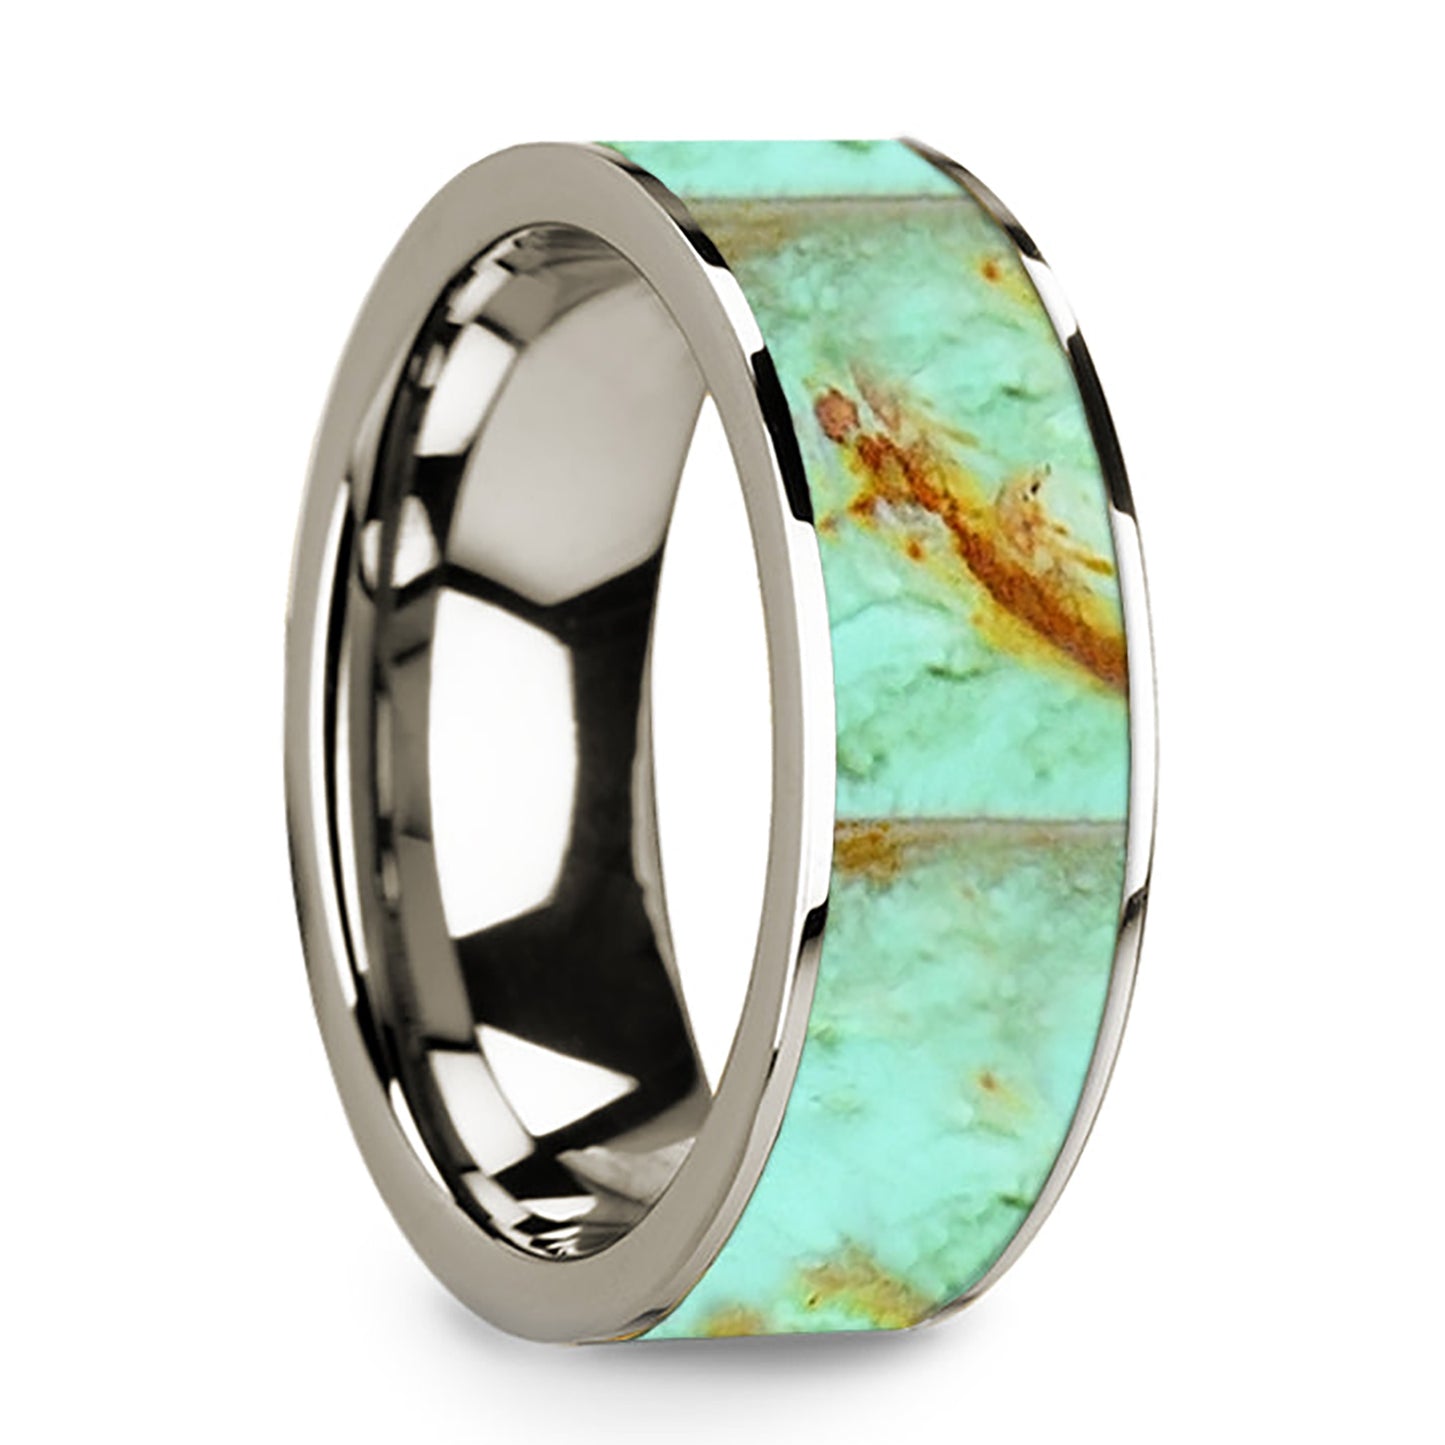 14k White Gold Men's Wedding Band with Turquoise Inlay